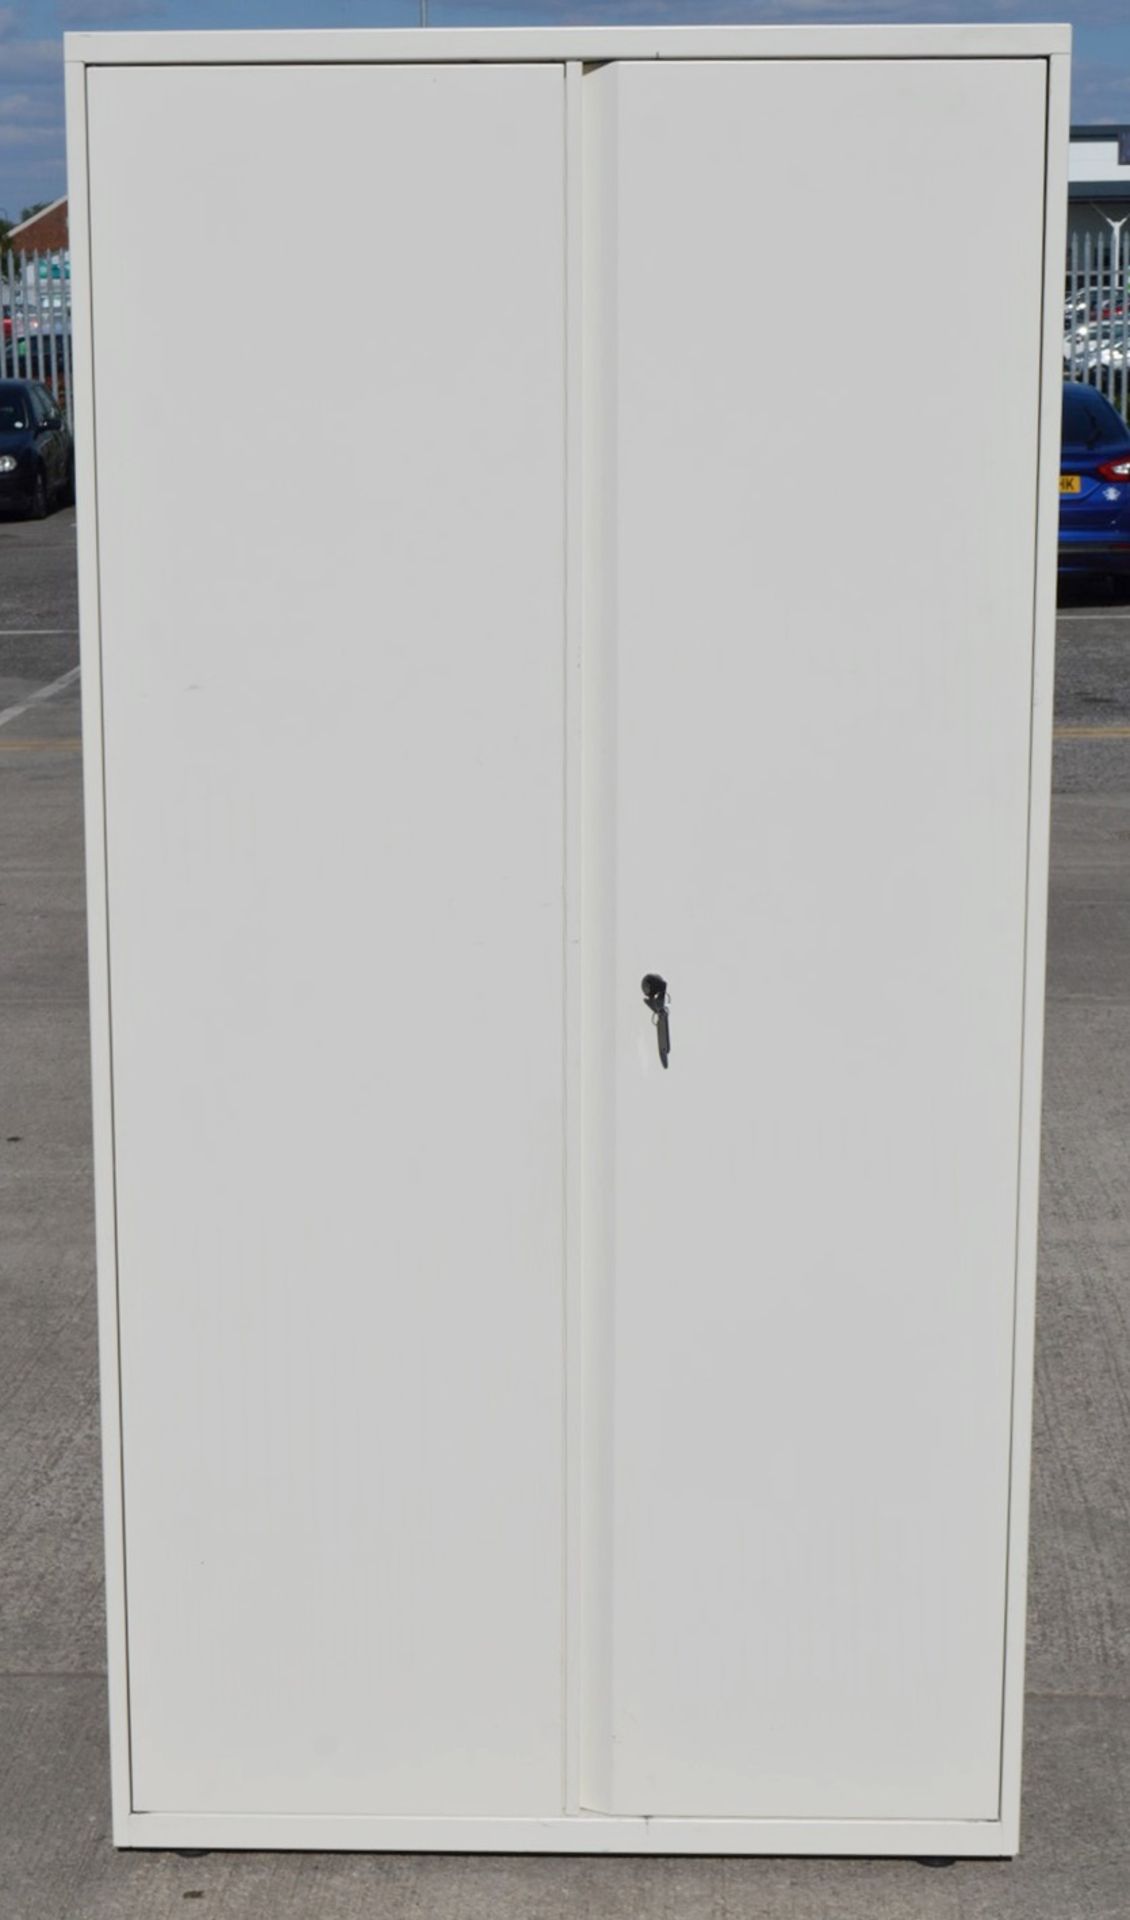 1 x Large BISLEY Metal Office Storage Cabinet With Key - Dimensions: H195 x W80 x D47cm - Used - Image 2 of 4